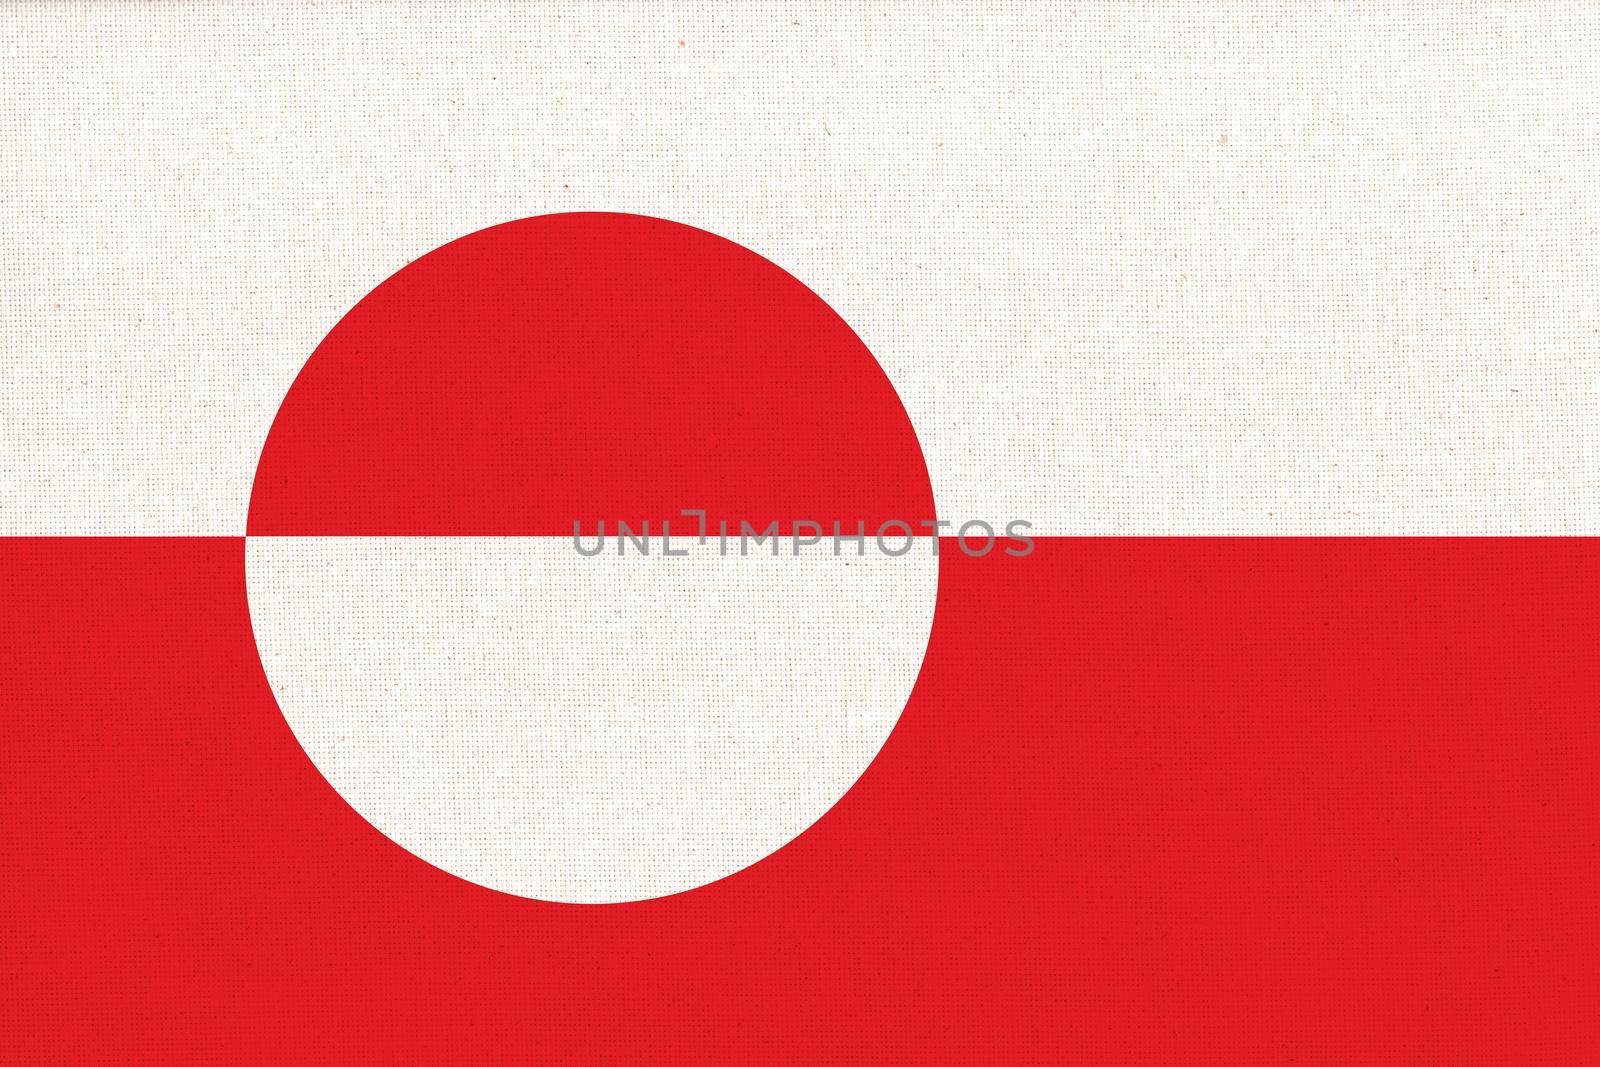 Flag of Greenland. Greenland flag on fabric surface. Fabric texture. National symbol. Flag of island Greenland